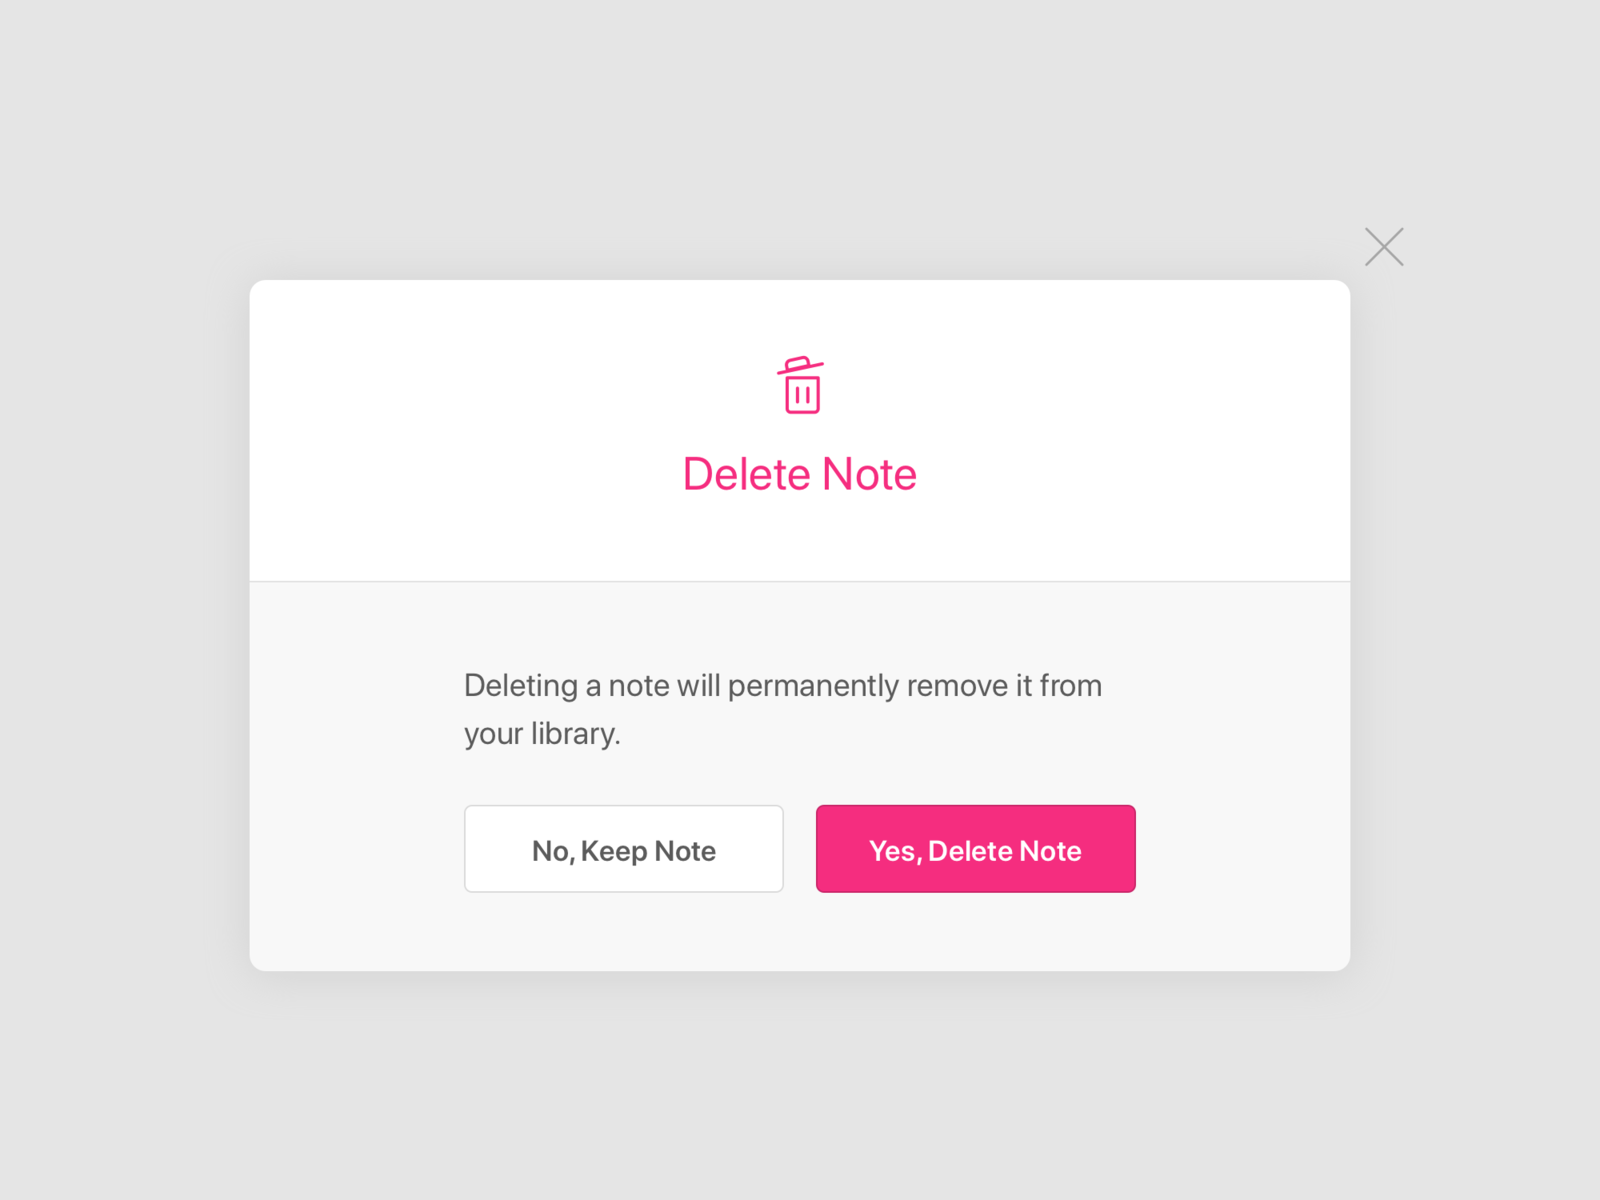 Microcopy in action: An example of simple labelling of call-to-action buttons